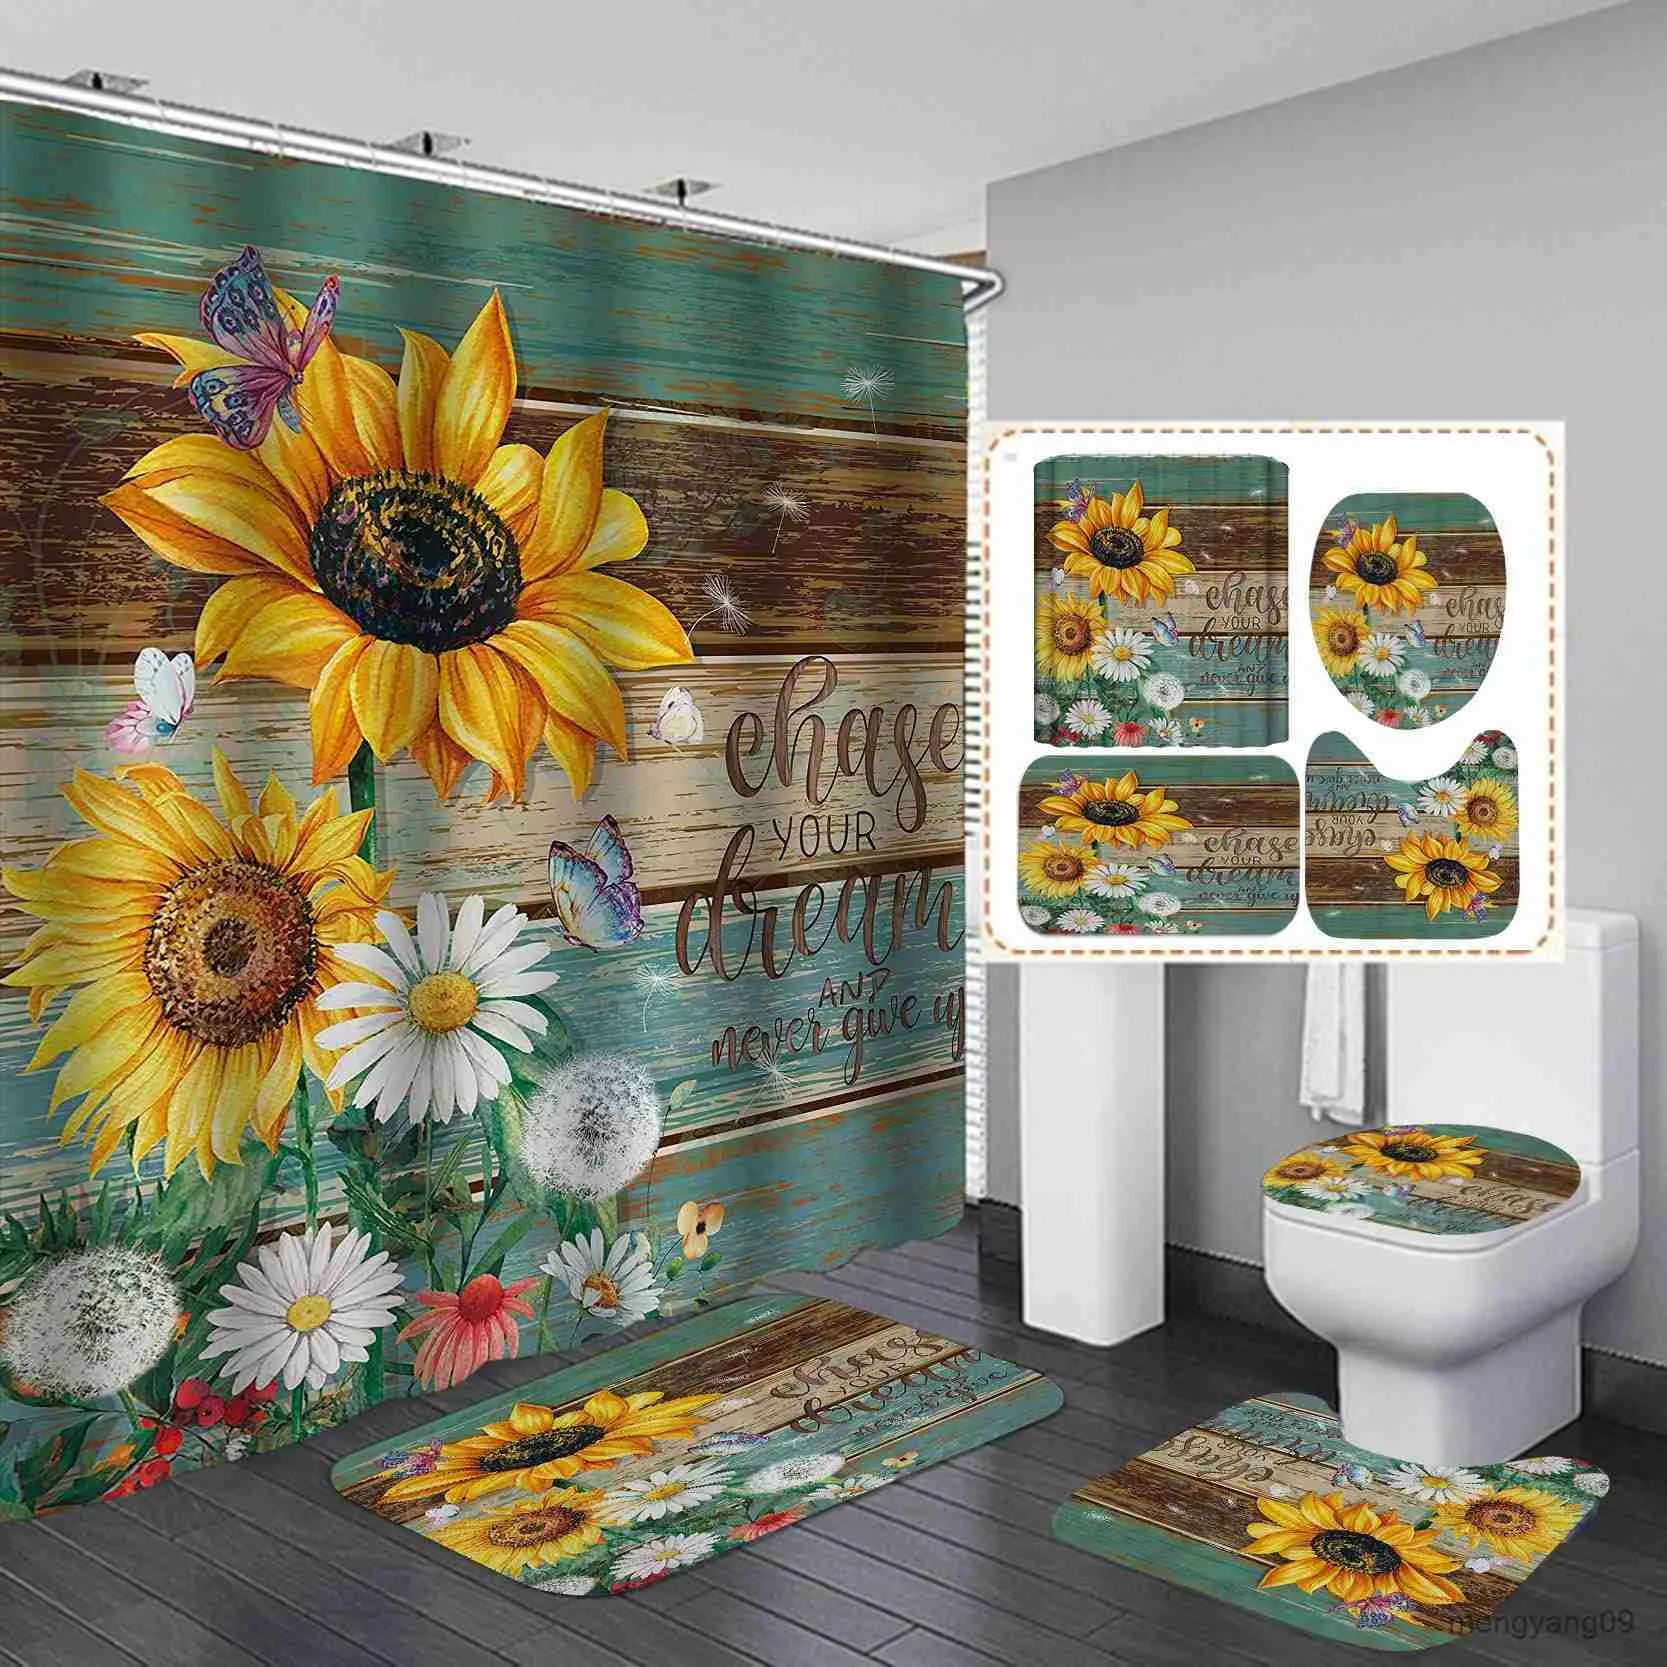 Shower Curtains Butterfly Sunflower Shower Curtain Sets Retro Floral Country Farmhouse Flower Rustic Wooden Bathroom Decor Sets R230831